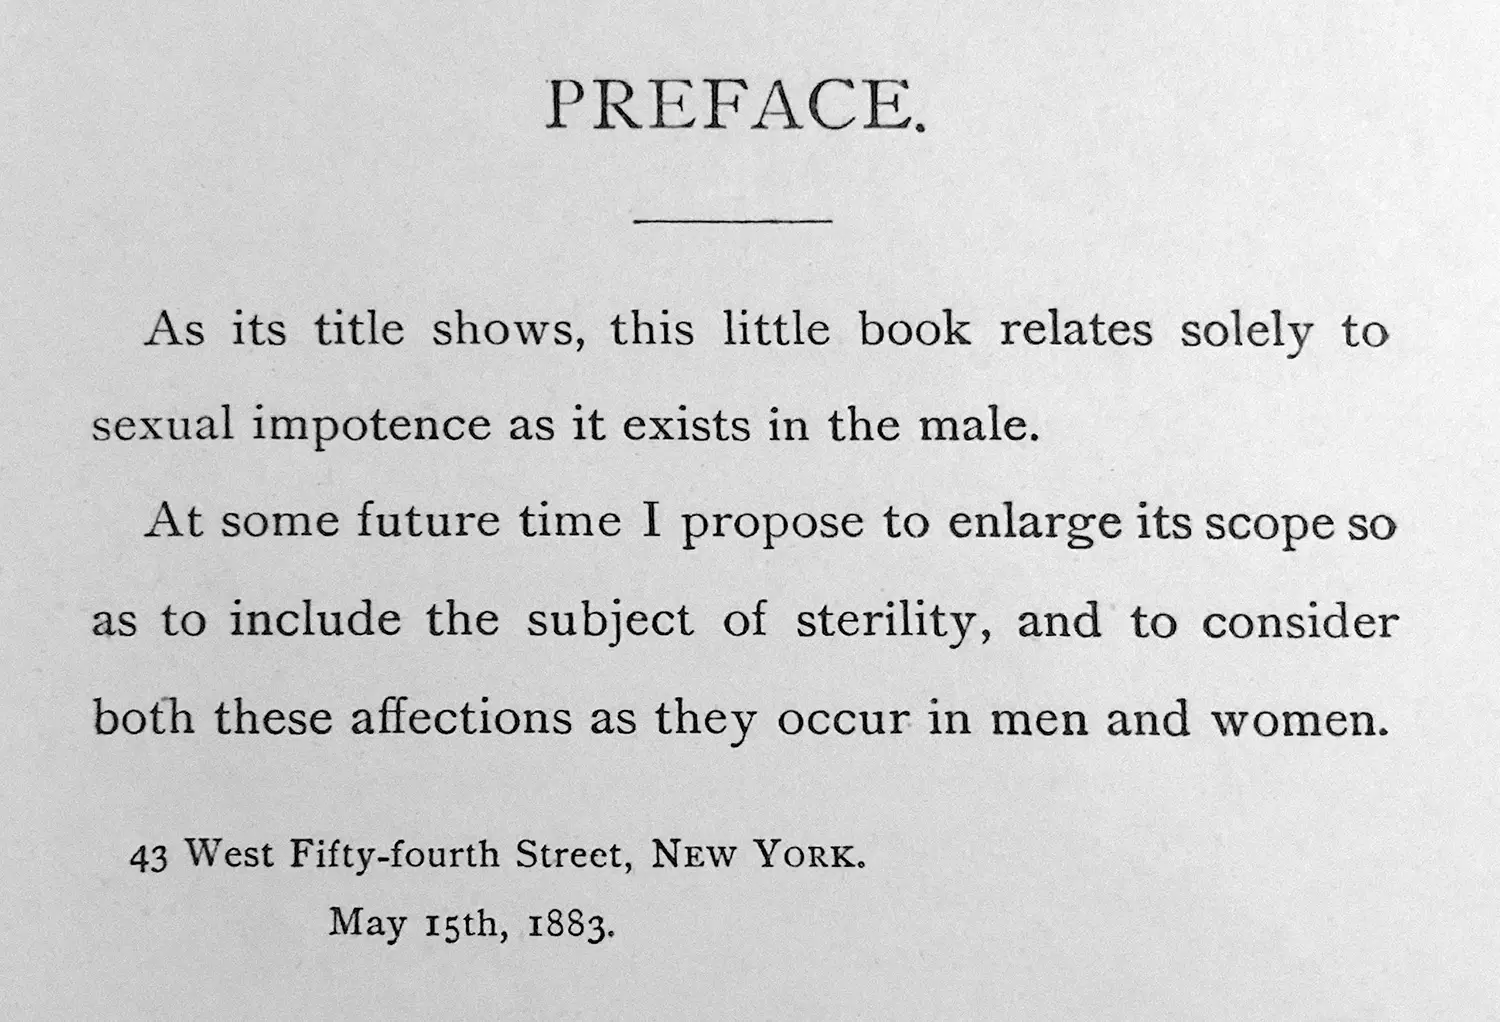 “As its title shows, this little book relates solely to sexual impotence as it exists in the male. At some future time I propose to enlarge its scope so as to include the subject of sterility, and to consider both these affections as they occur in men and women. 43 West Fifty-fourth Street, New York, May 15th, 1883.”